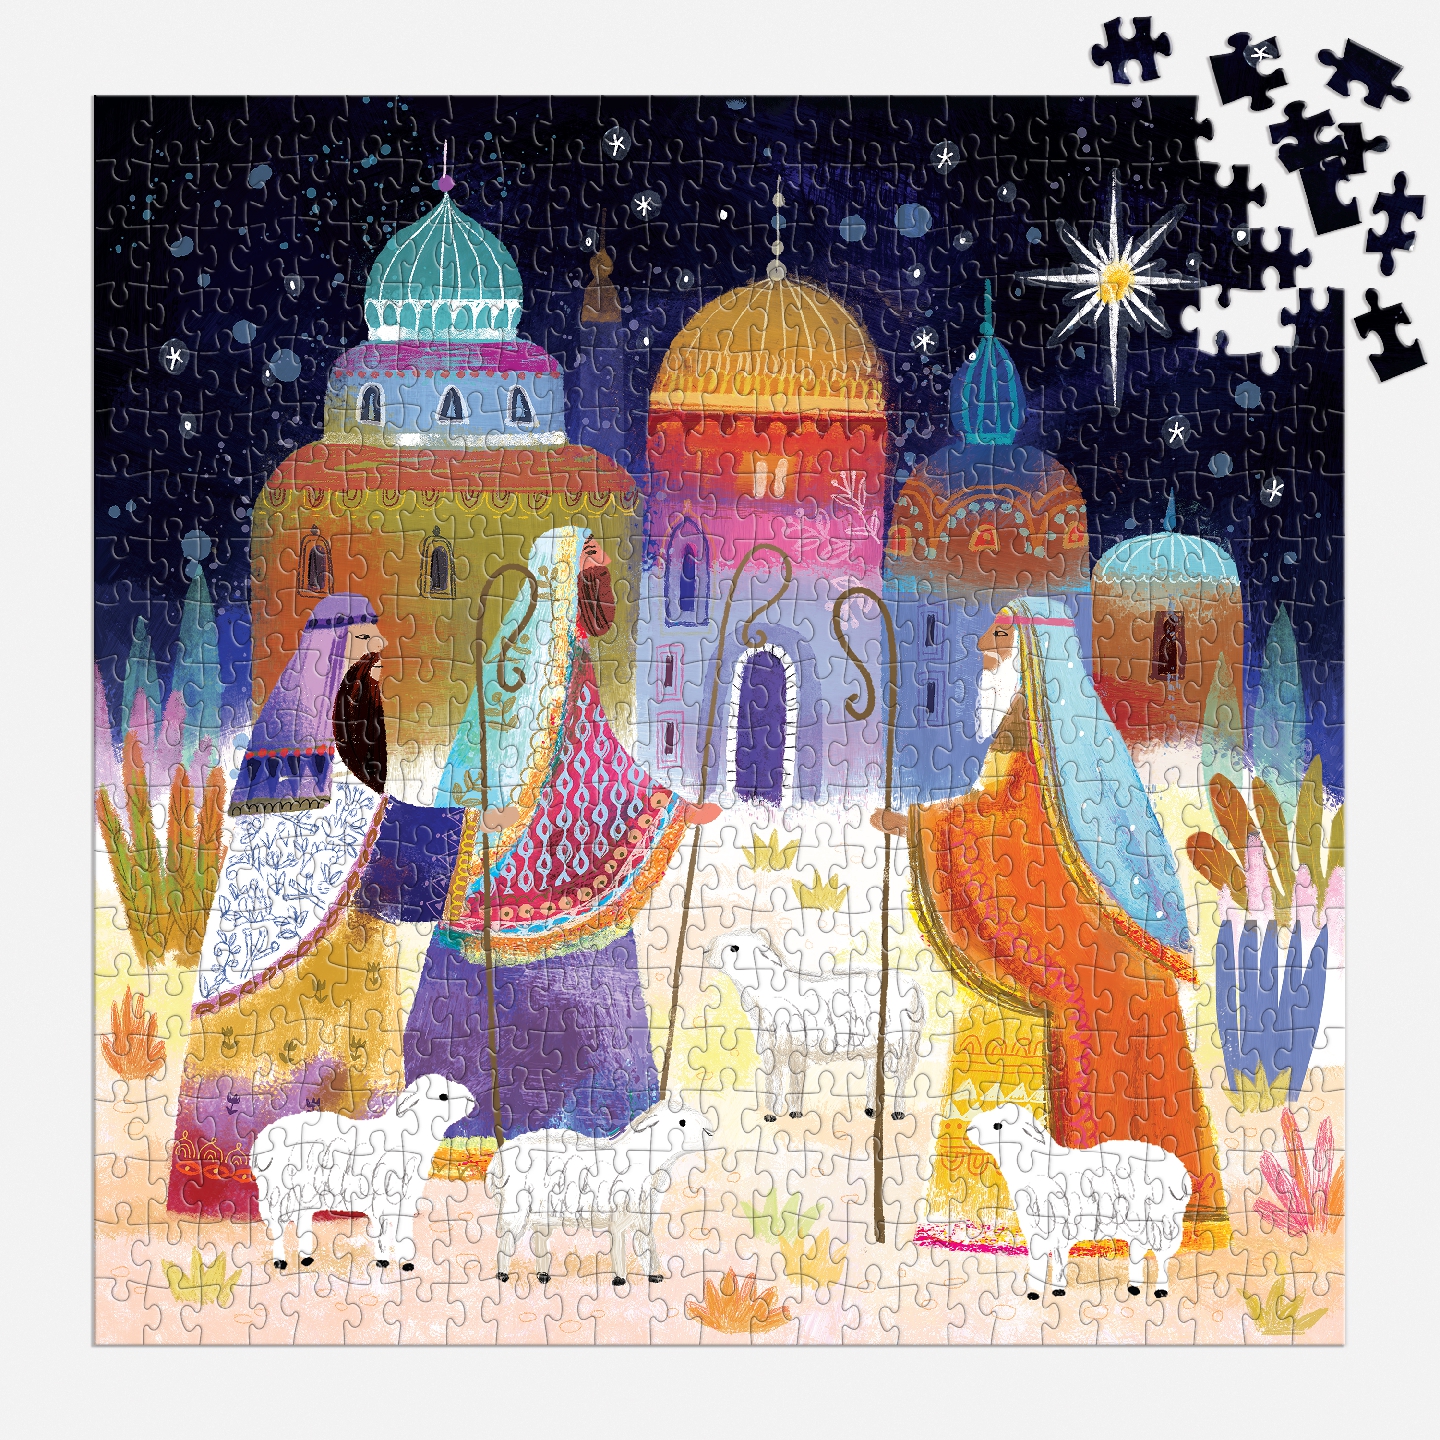 Journey Of Three Kings 500 Piece Puzzle